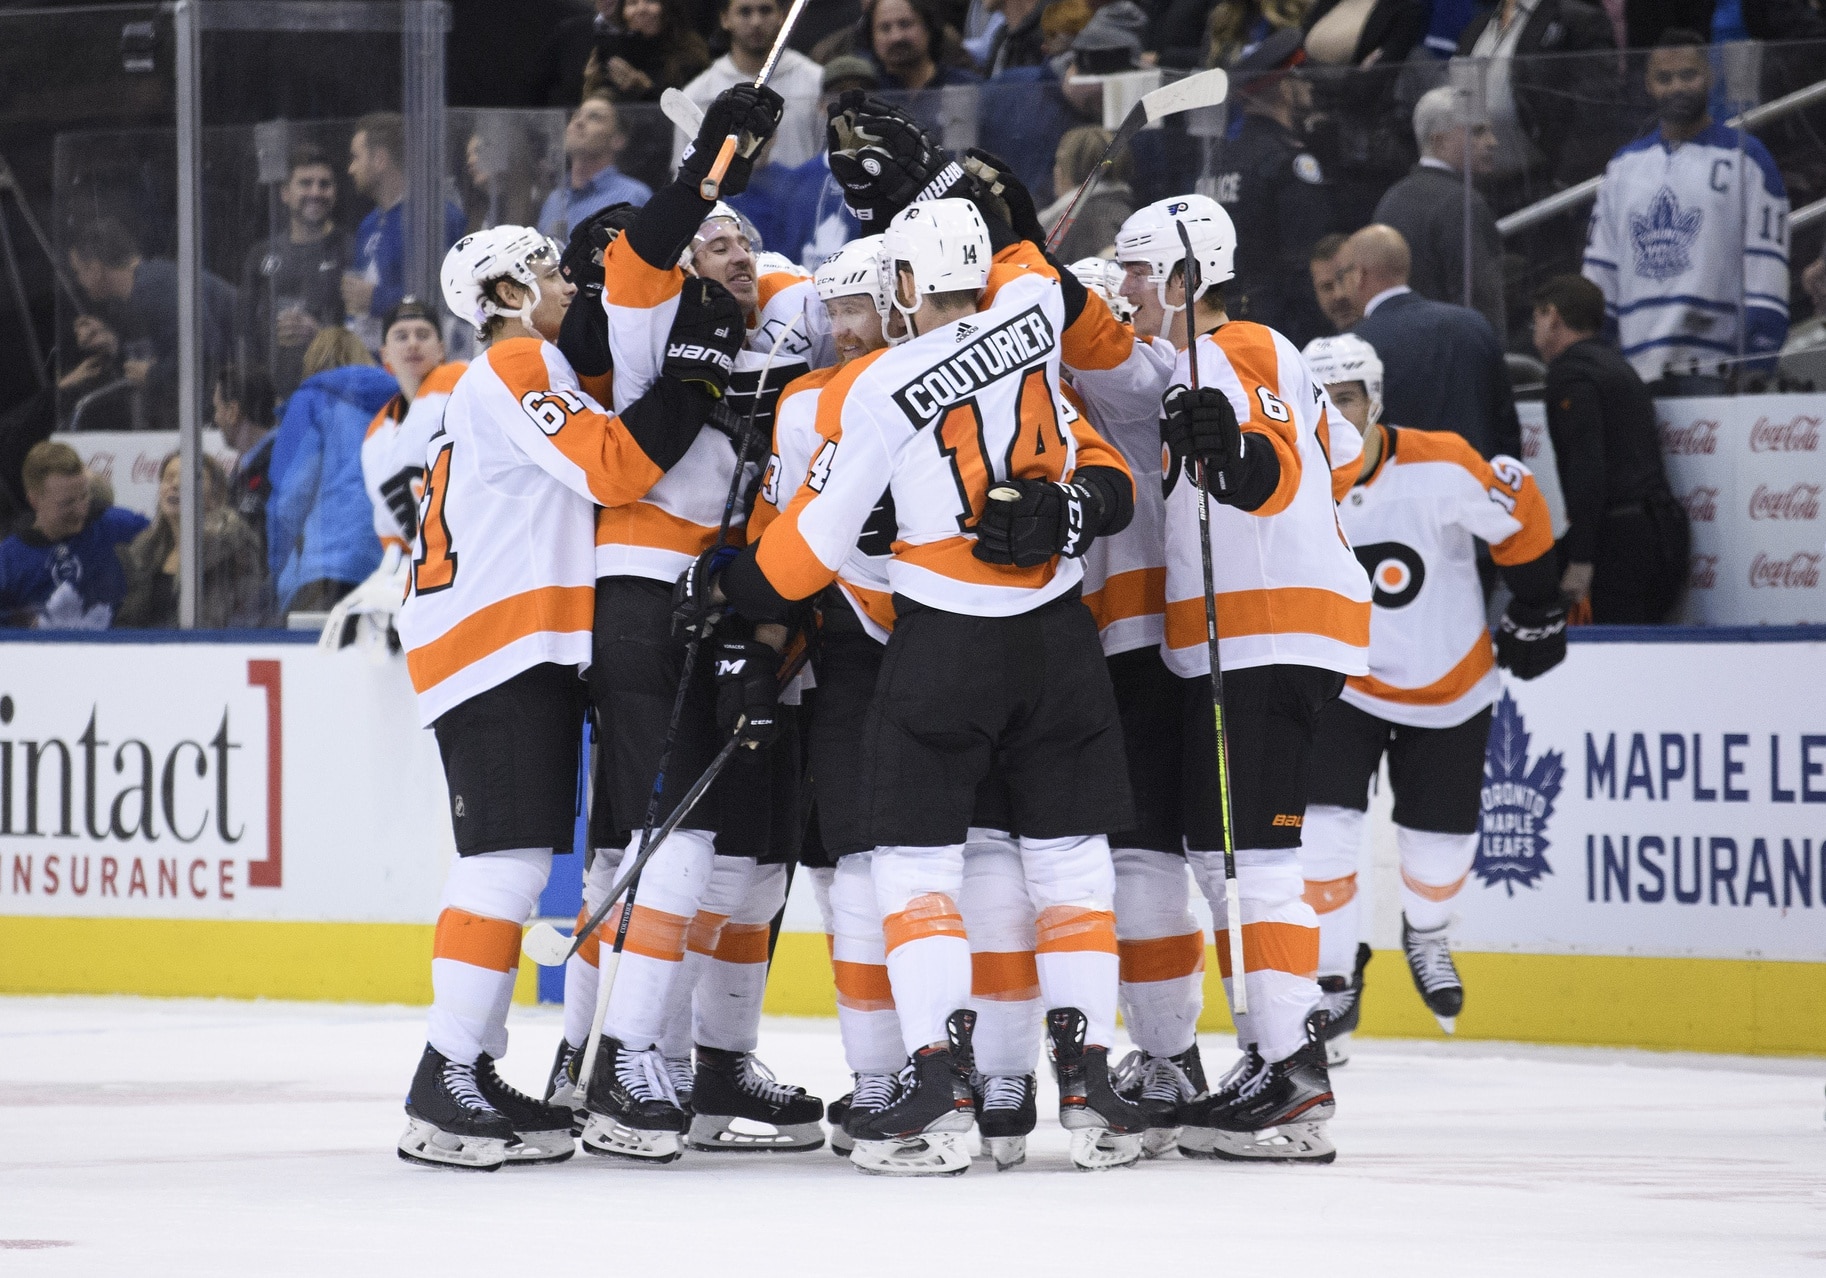 A Passing Grade: Flyers Get Past Maple Leafs 3-2, but Bigger Tests Loom